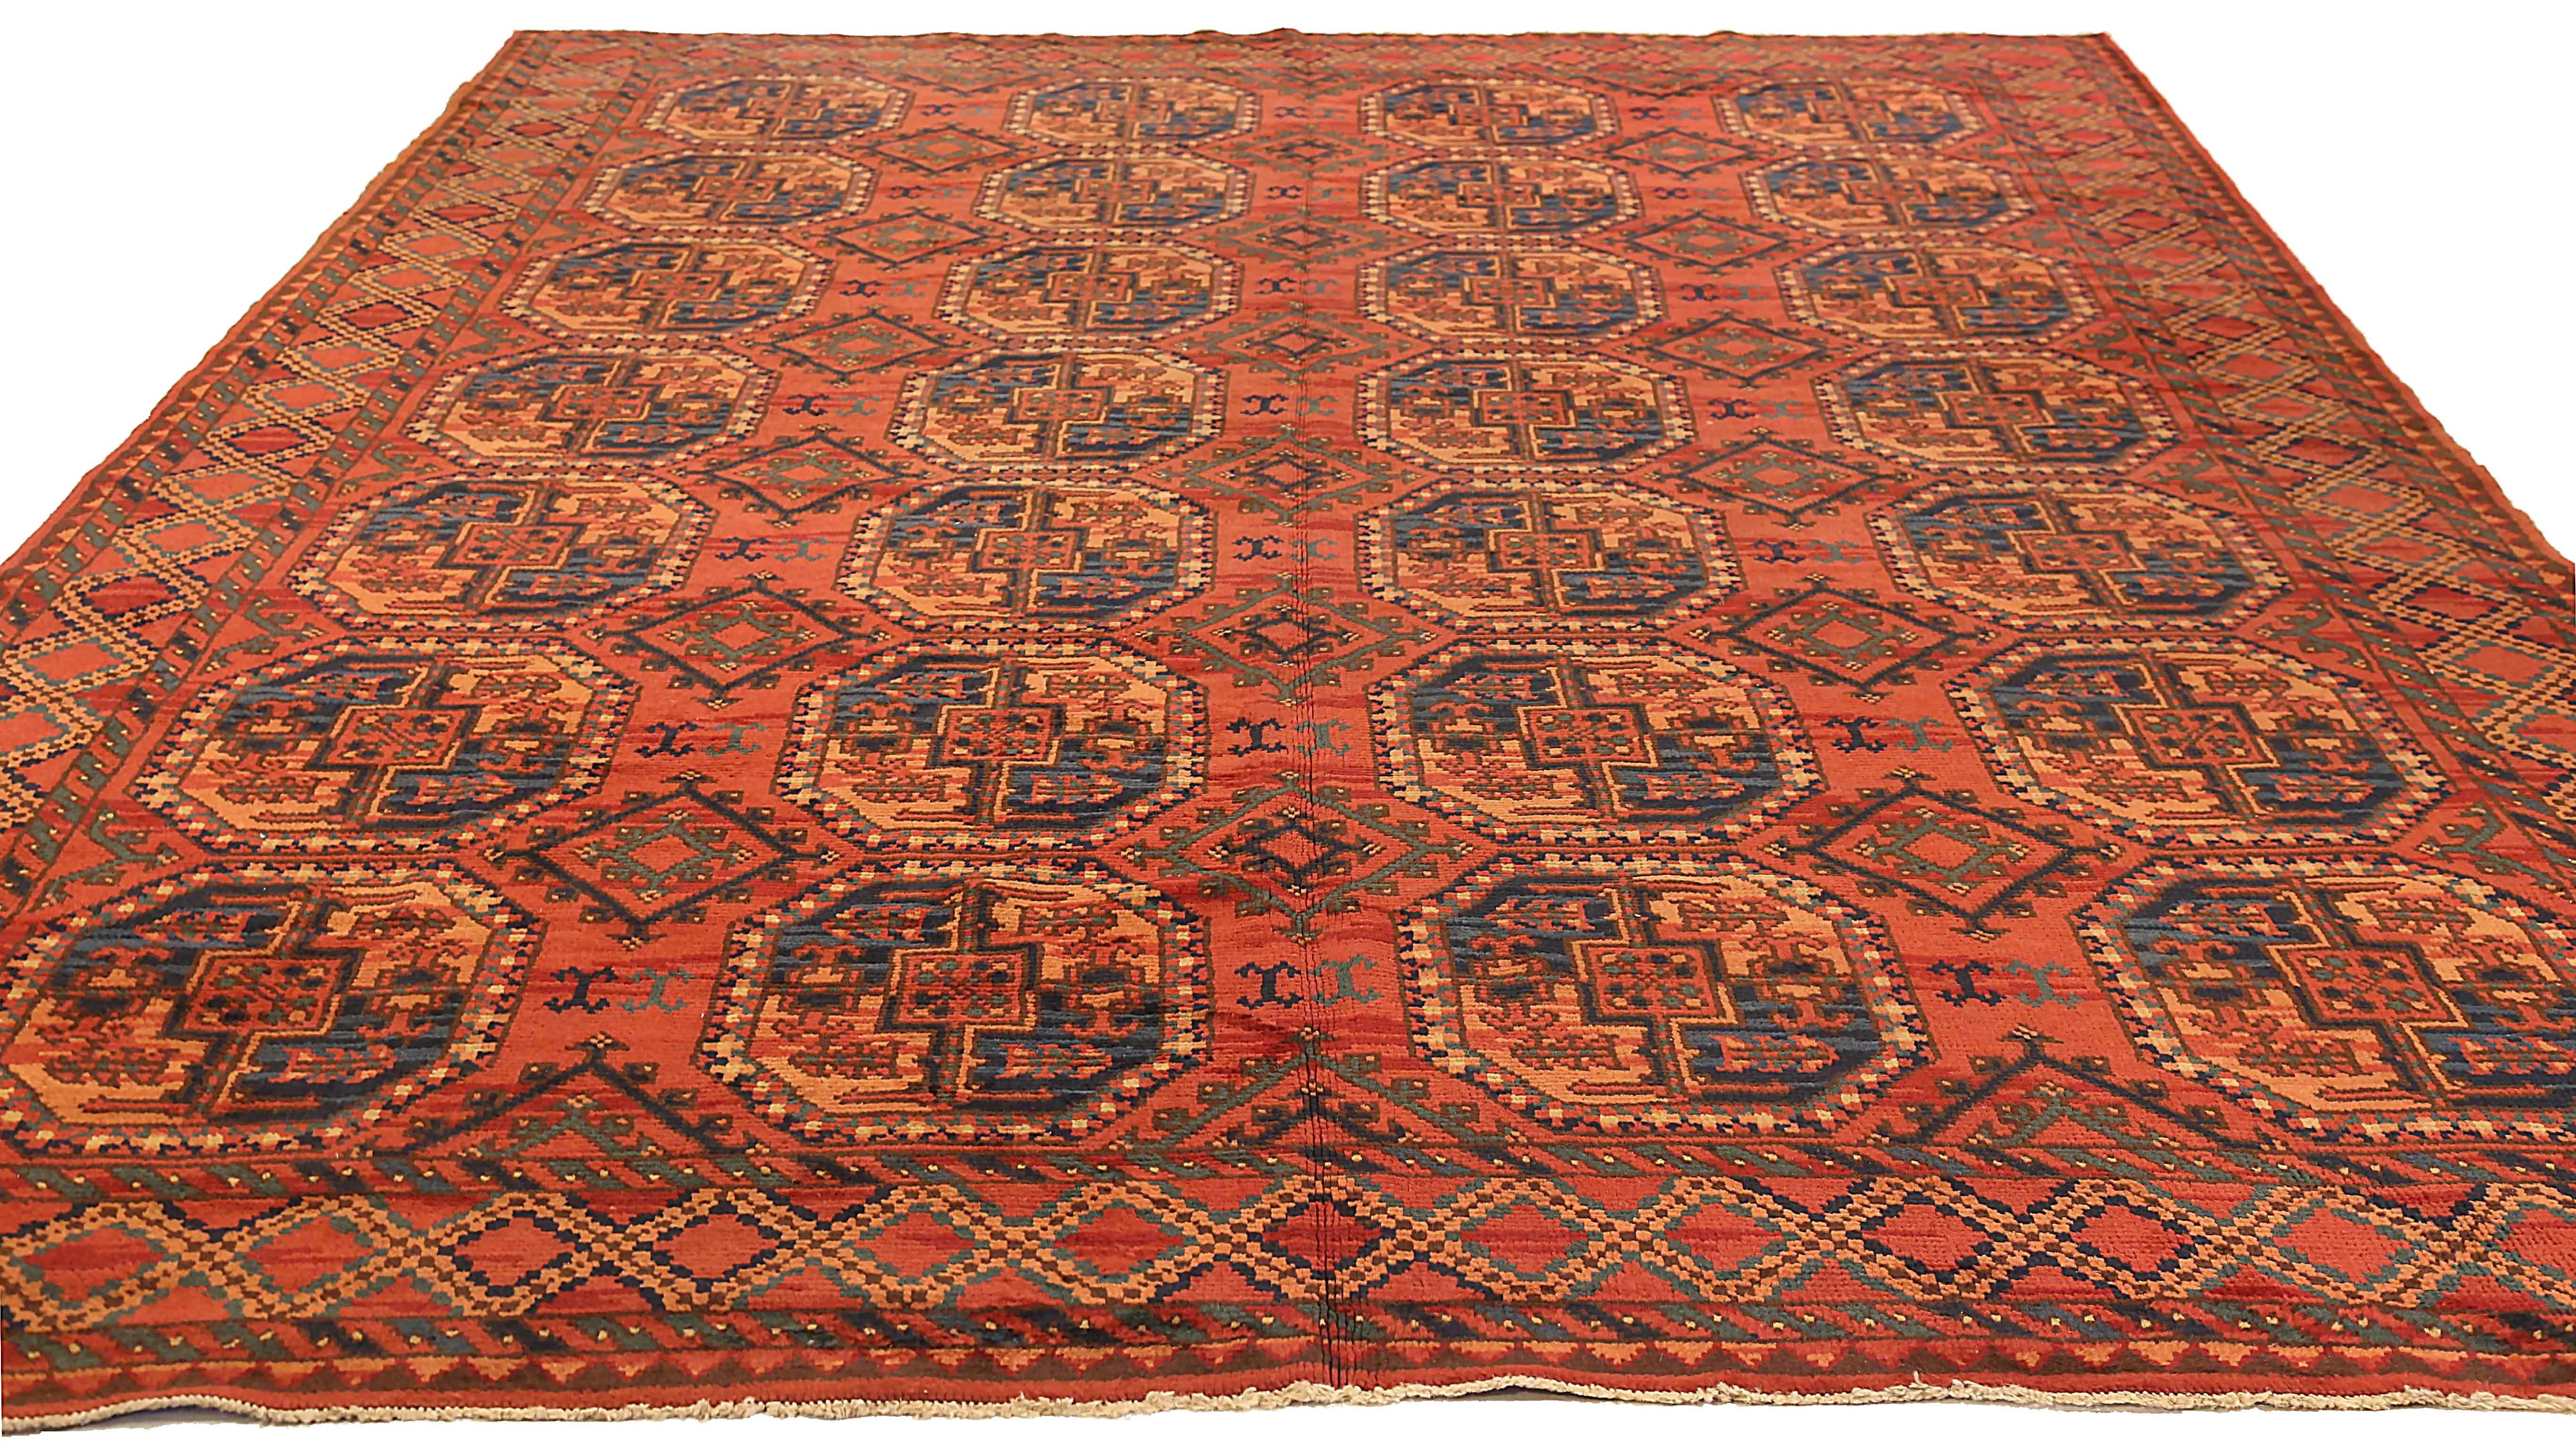 Antique Afghan area rug handwoven from the finest sheep’s wool. It’s colored with all-natural vegetable dyes that are safe for humans and pets. It’s a traditional Bashir design handwoven by expert artisans.
It’s a lovely area rug that can be